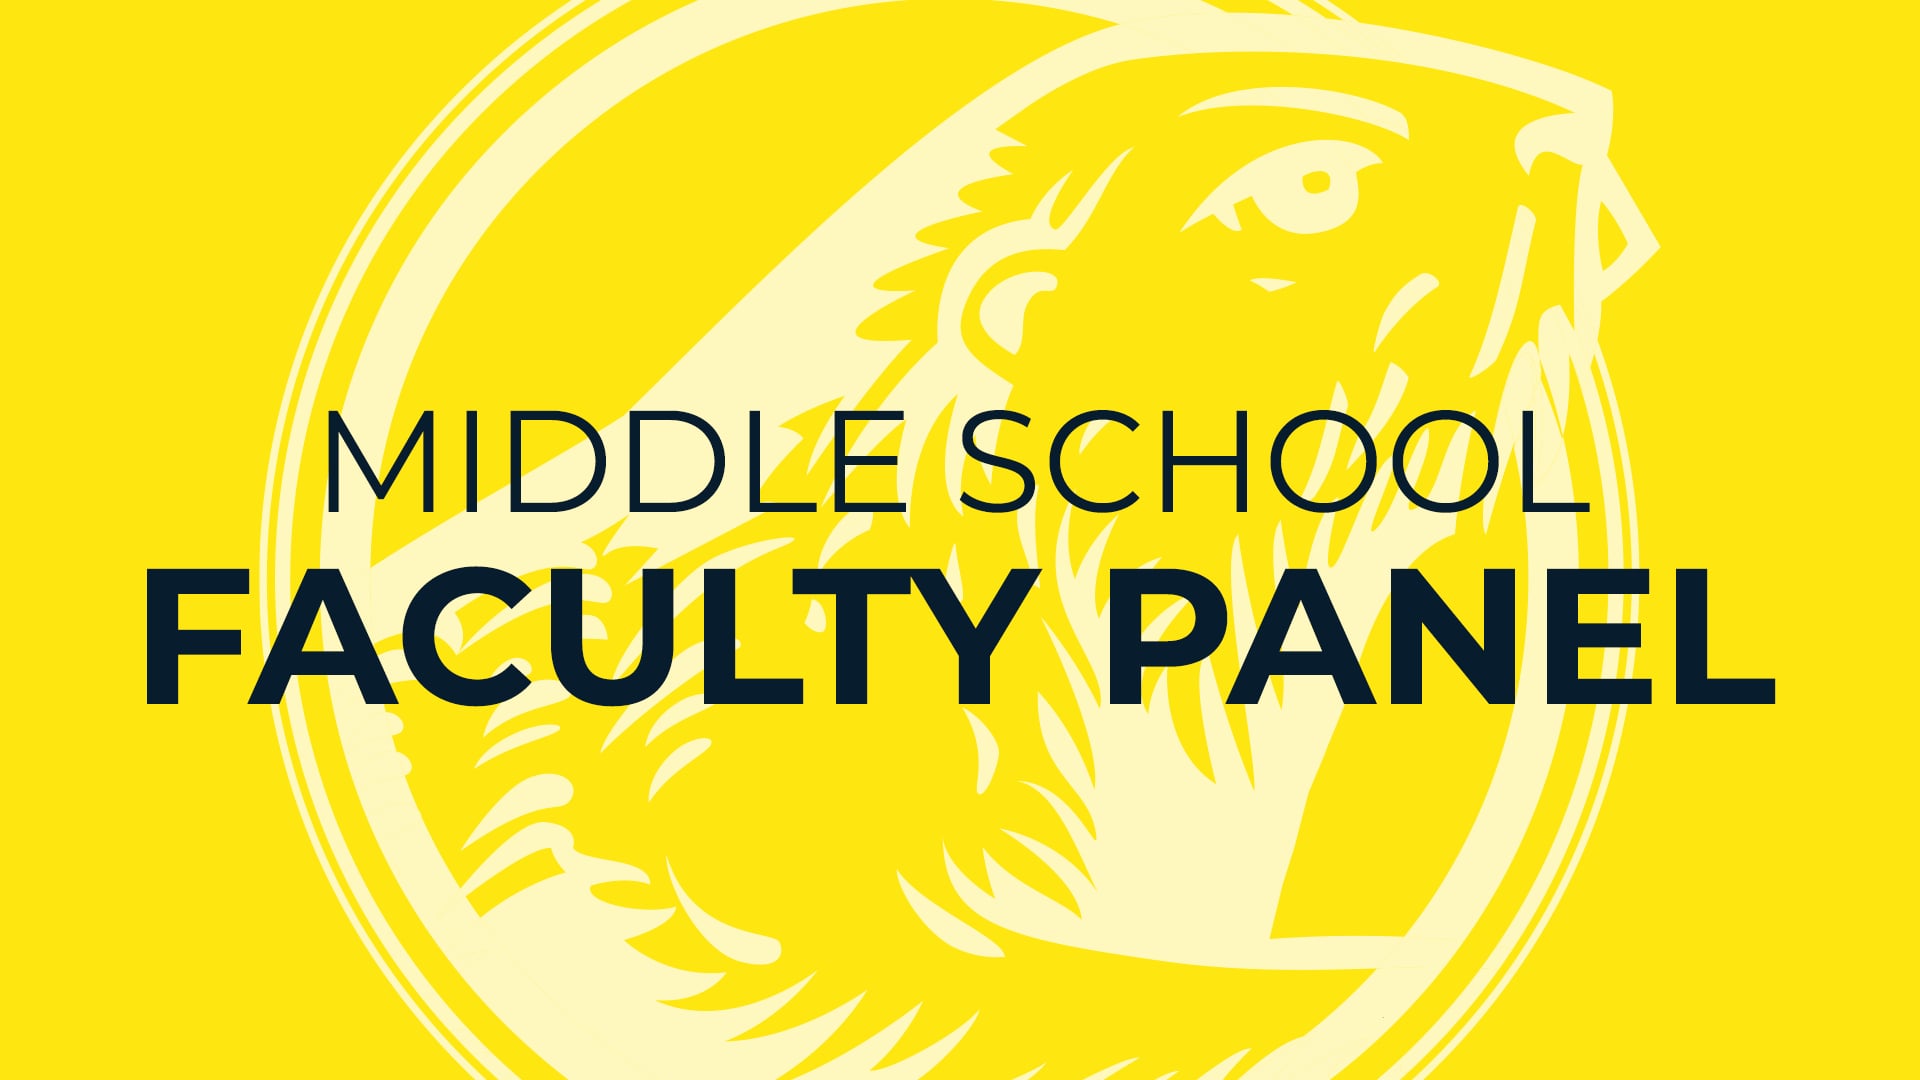 Middle School Faculty Panel: Revisit Day 2020